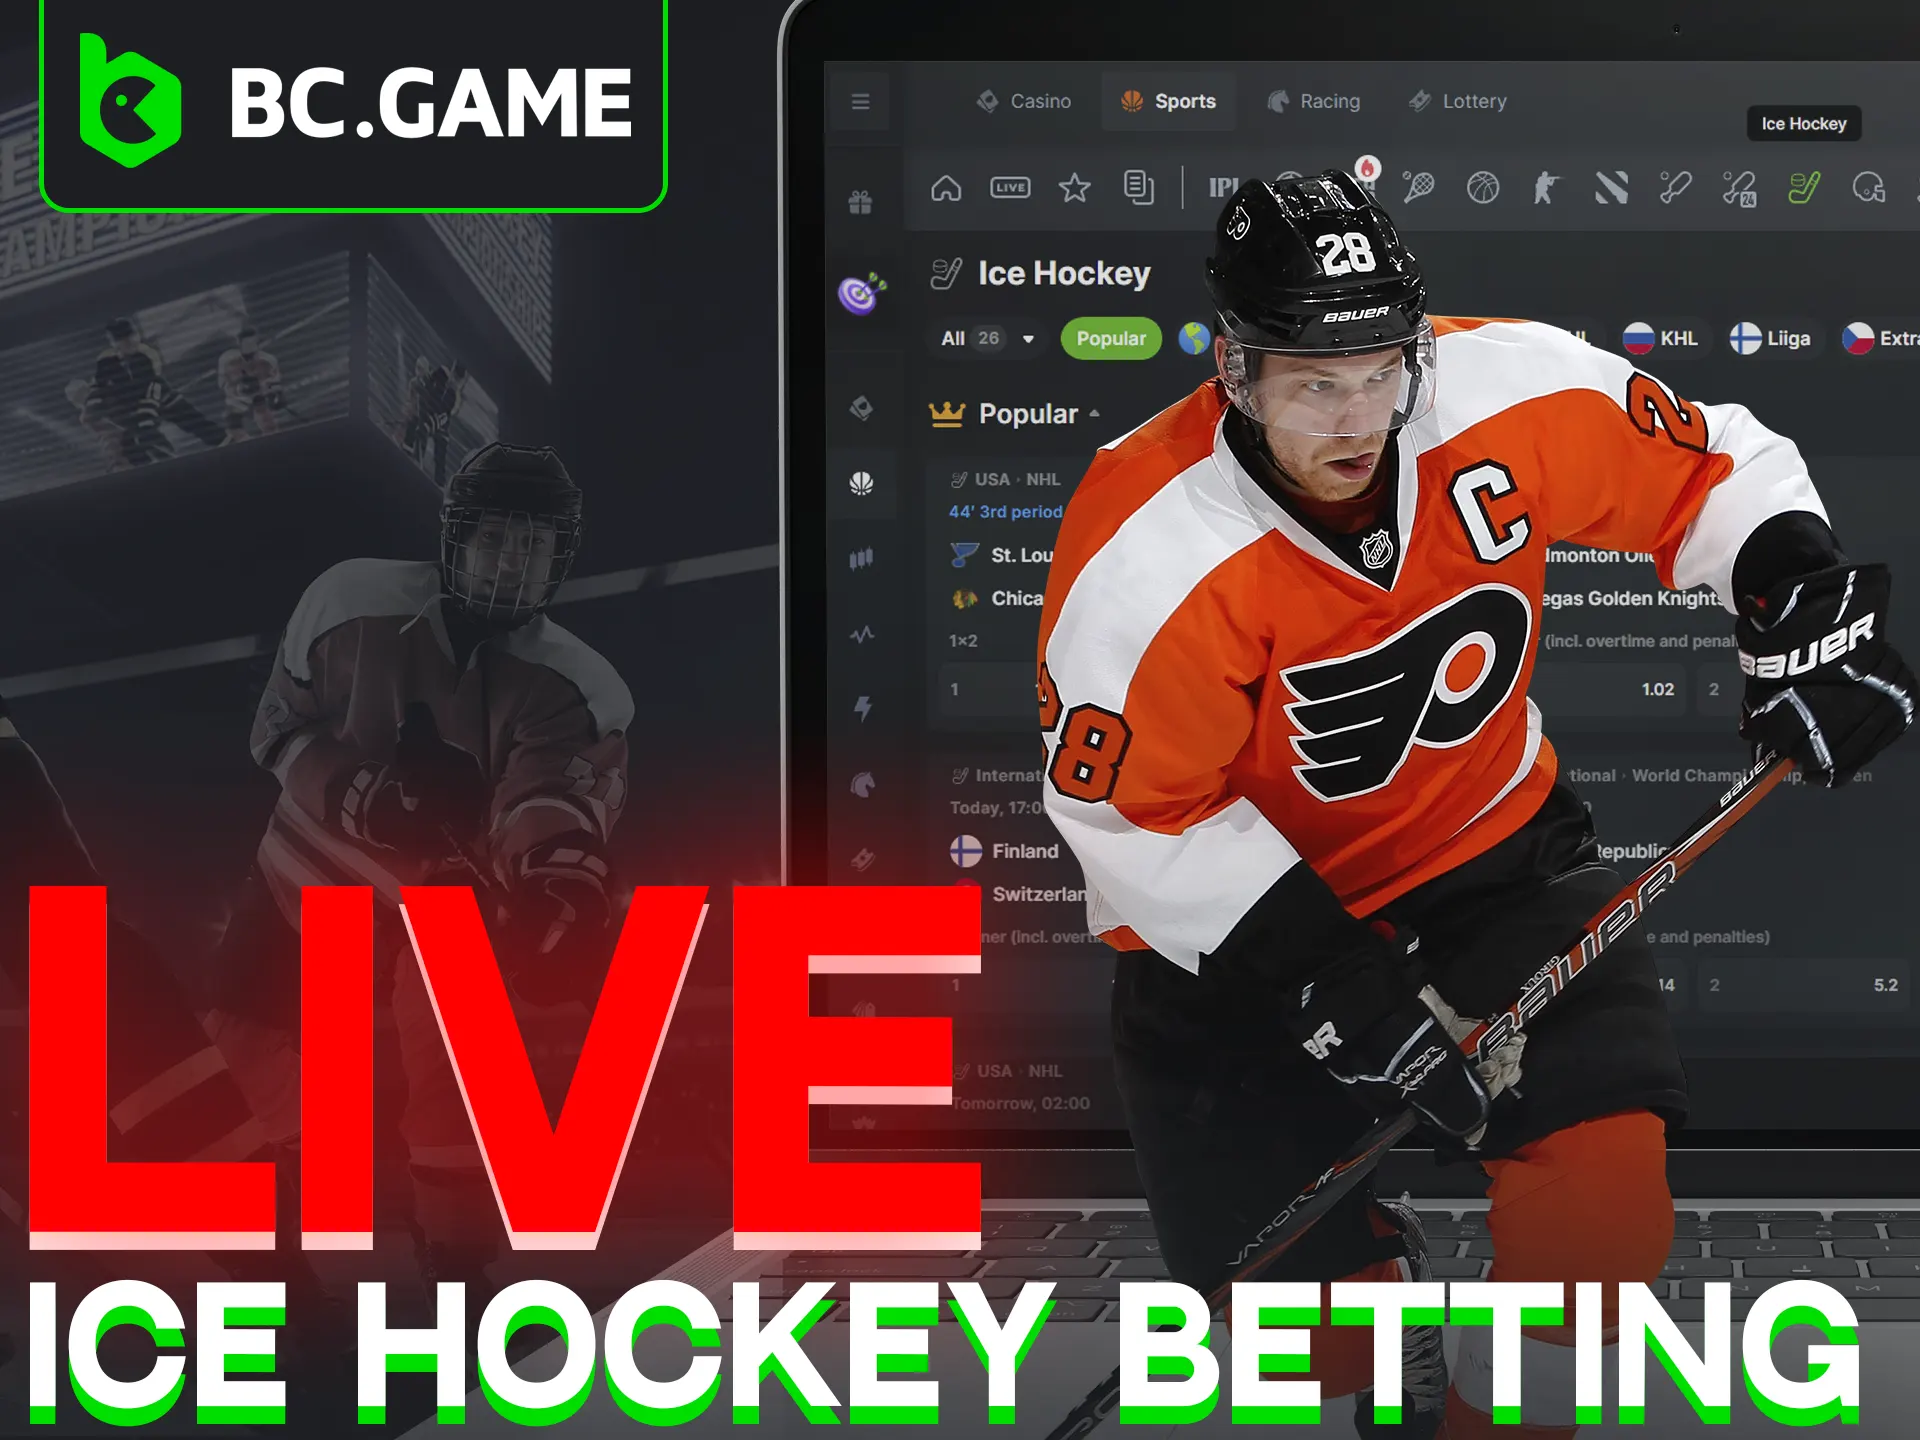 Bet on live hockey matches with BC Game.